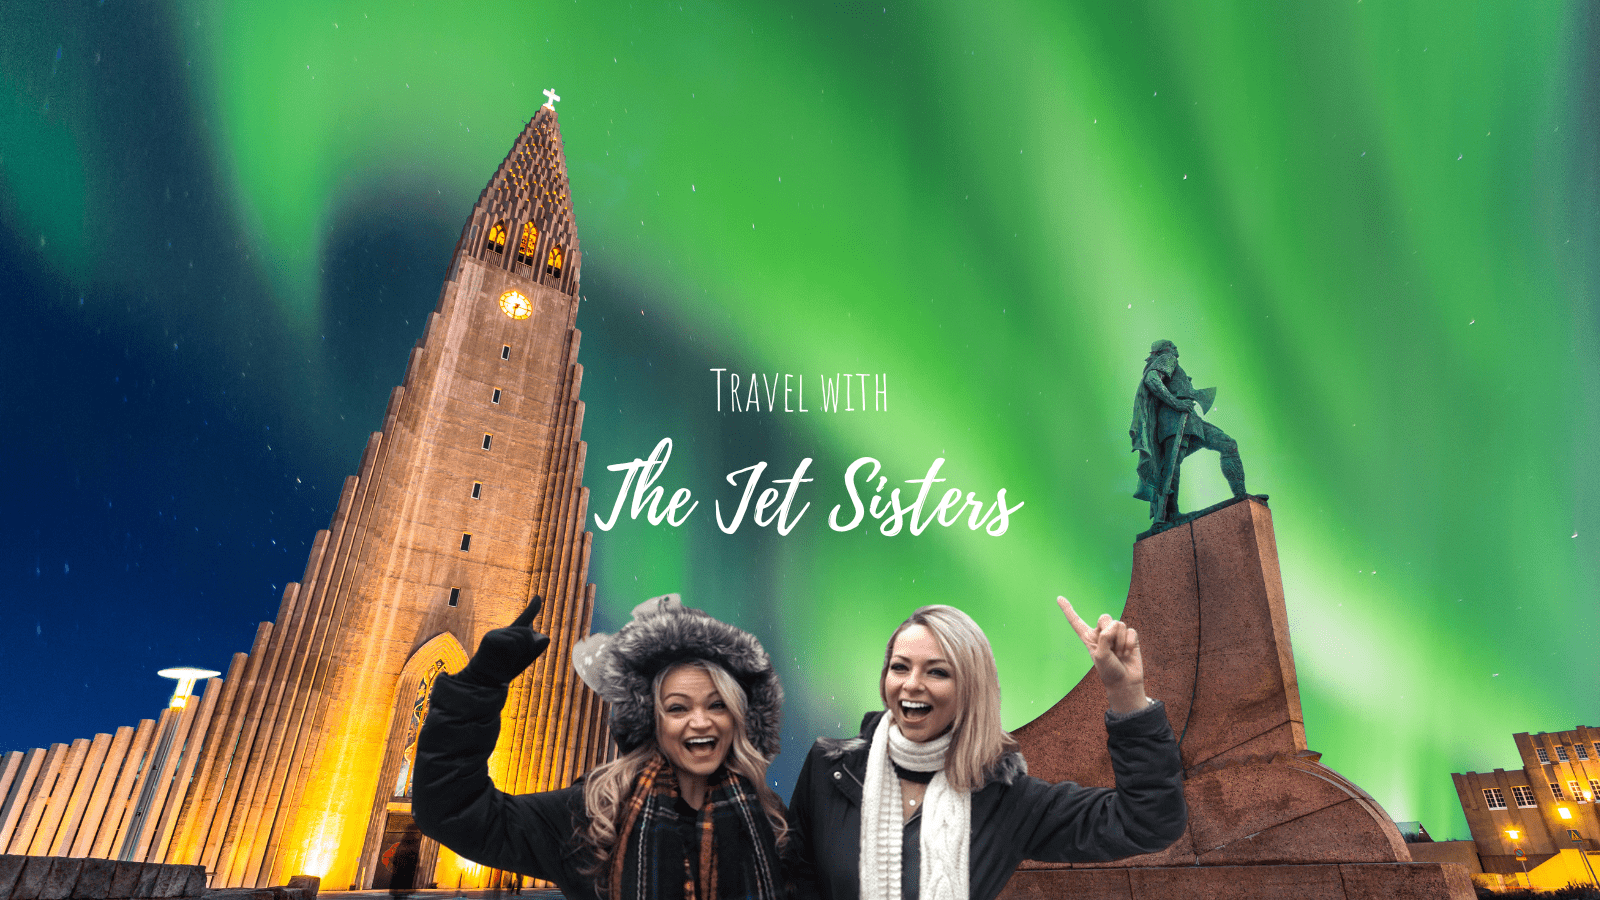 The Jet Sisters Iceland